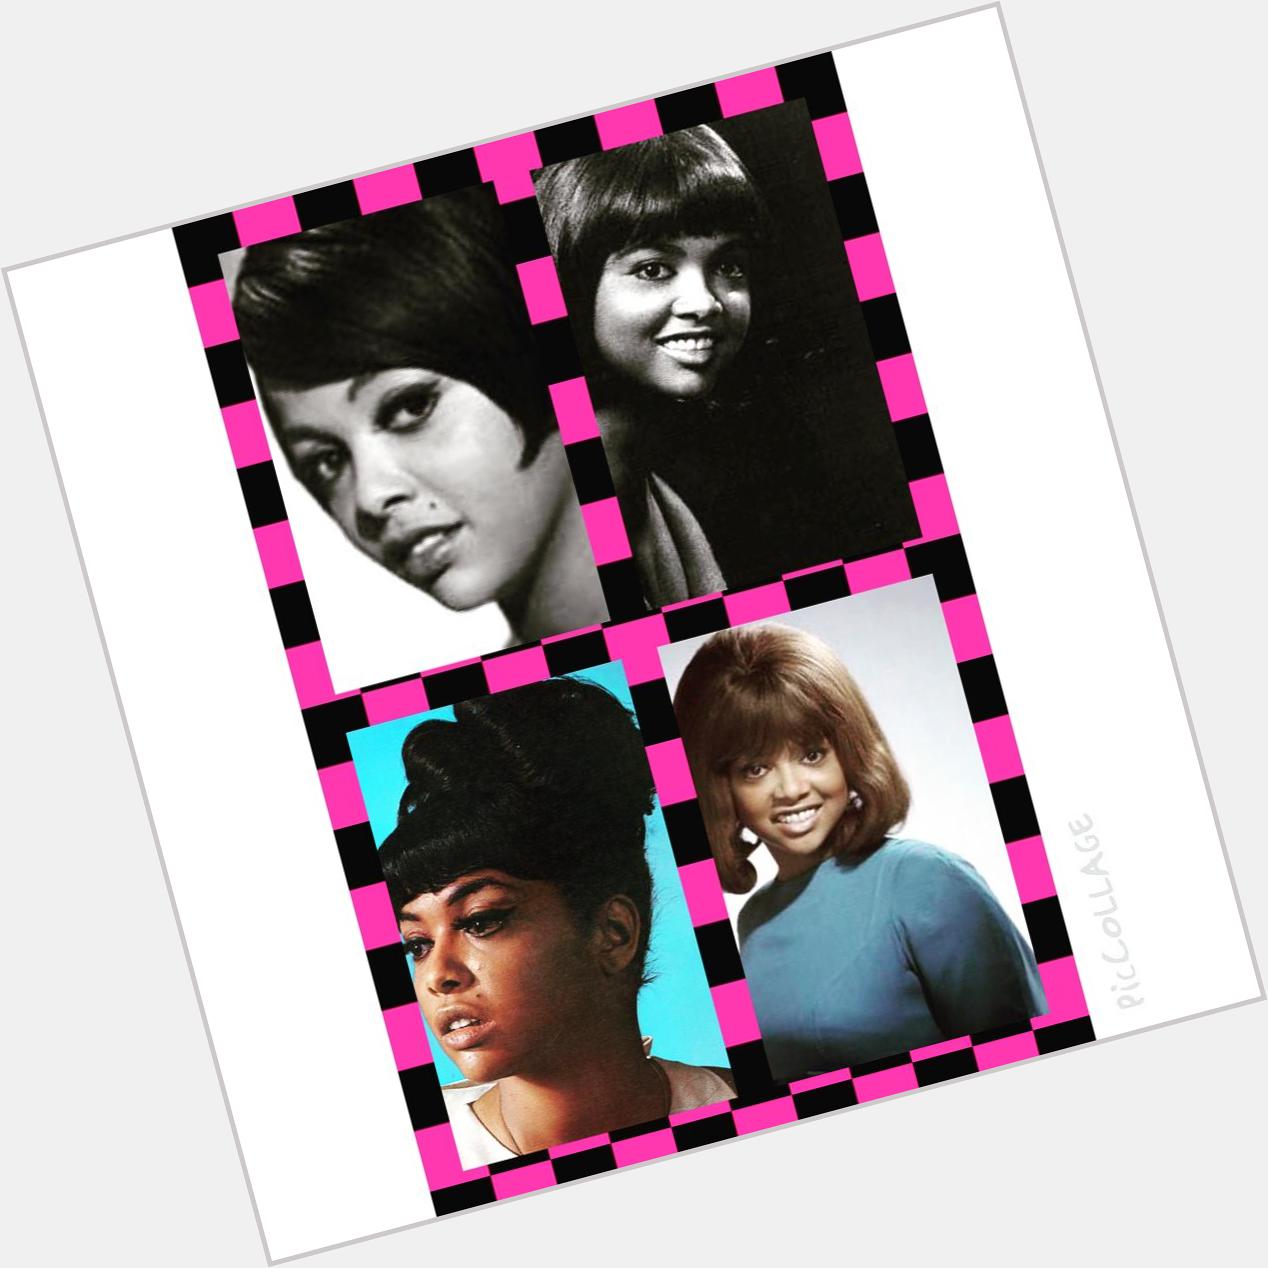 Happy birthday to the Tammi Terrell she would\ve been 70 years old today (4/29/45-3/16/70)  